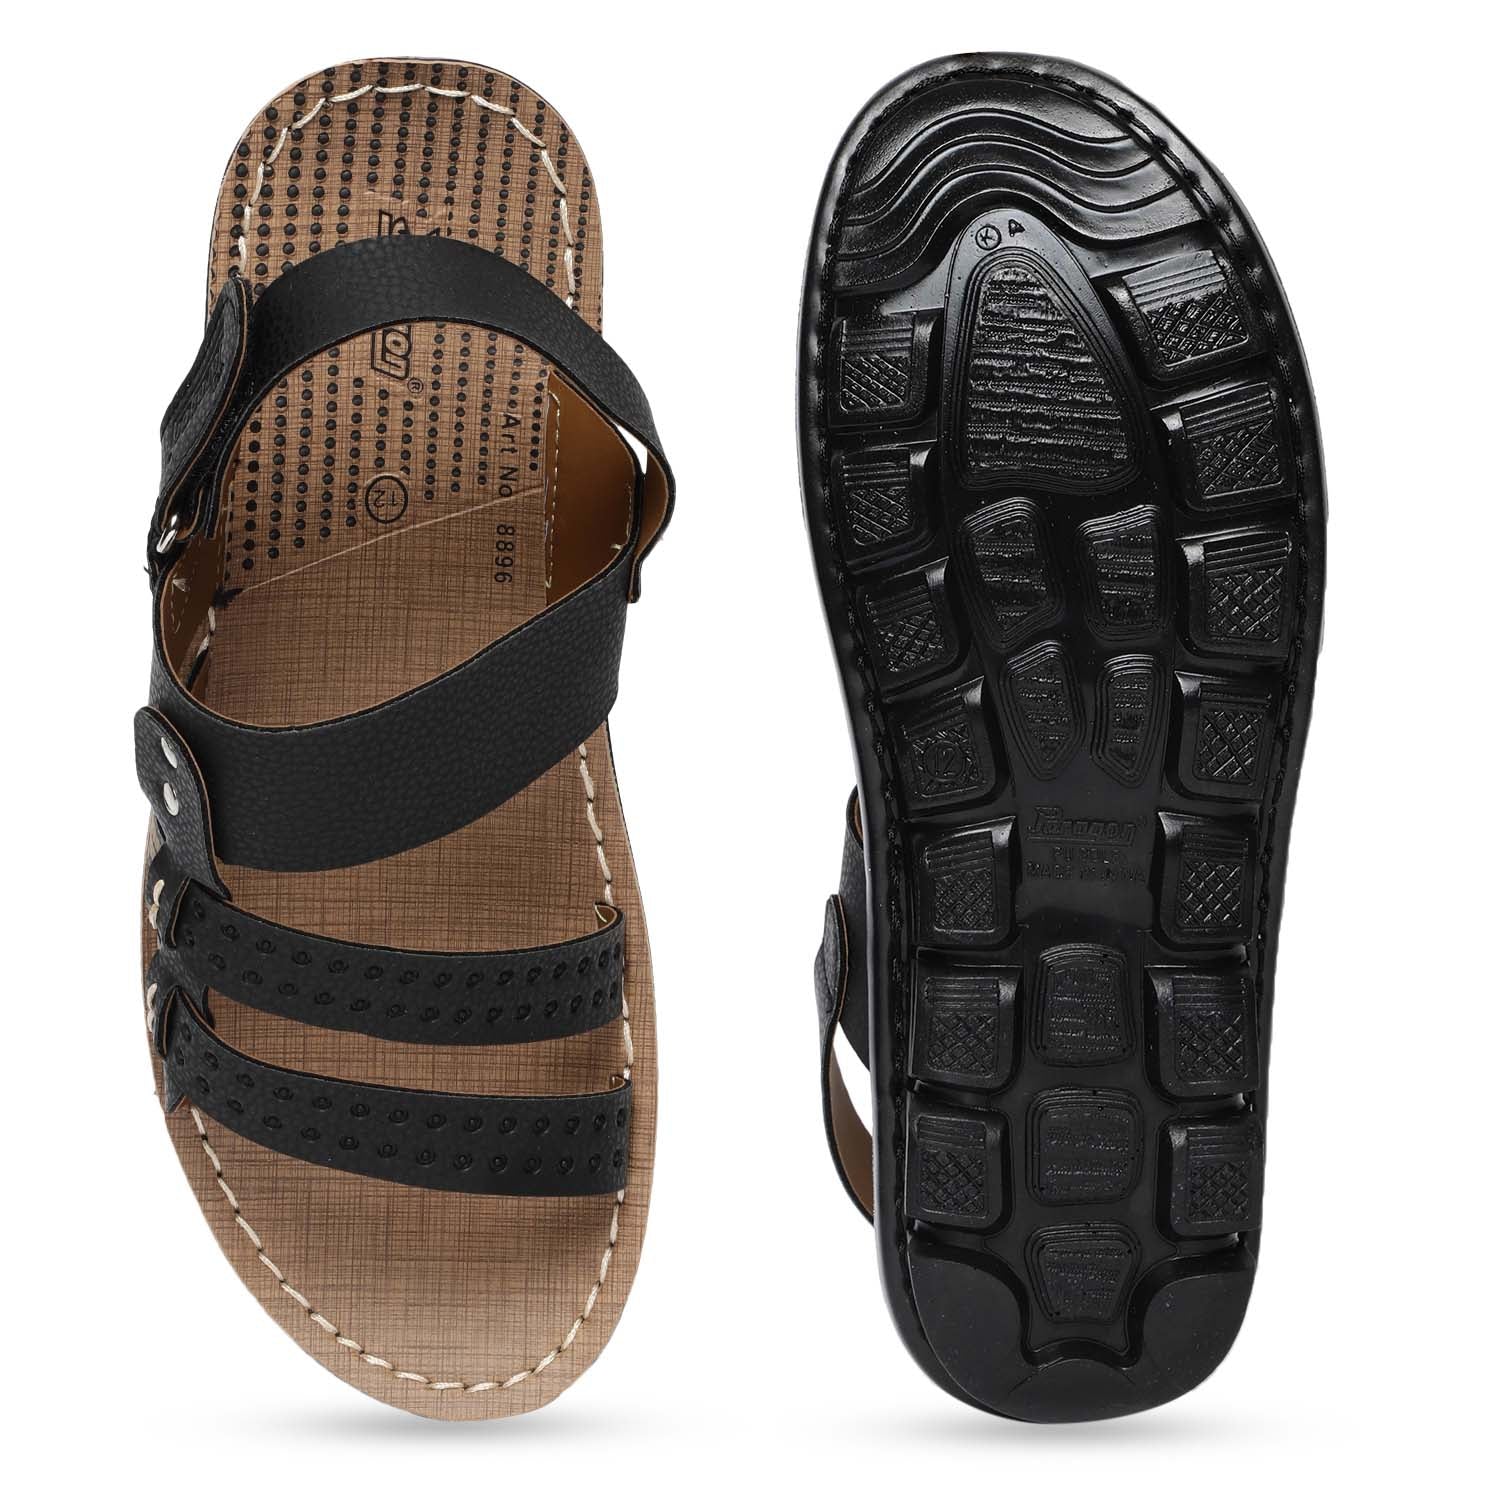 Paragon PU8896T Men Stylish Sandals | Comfortable Sandals for Daily Outdoor Use | Casual Formal Sandals with Cushioned Soles